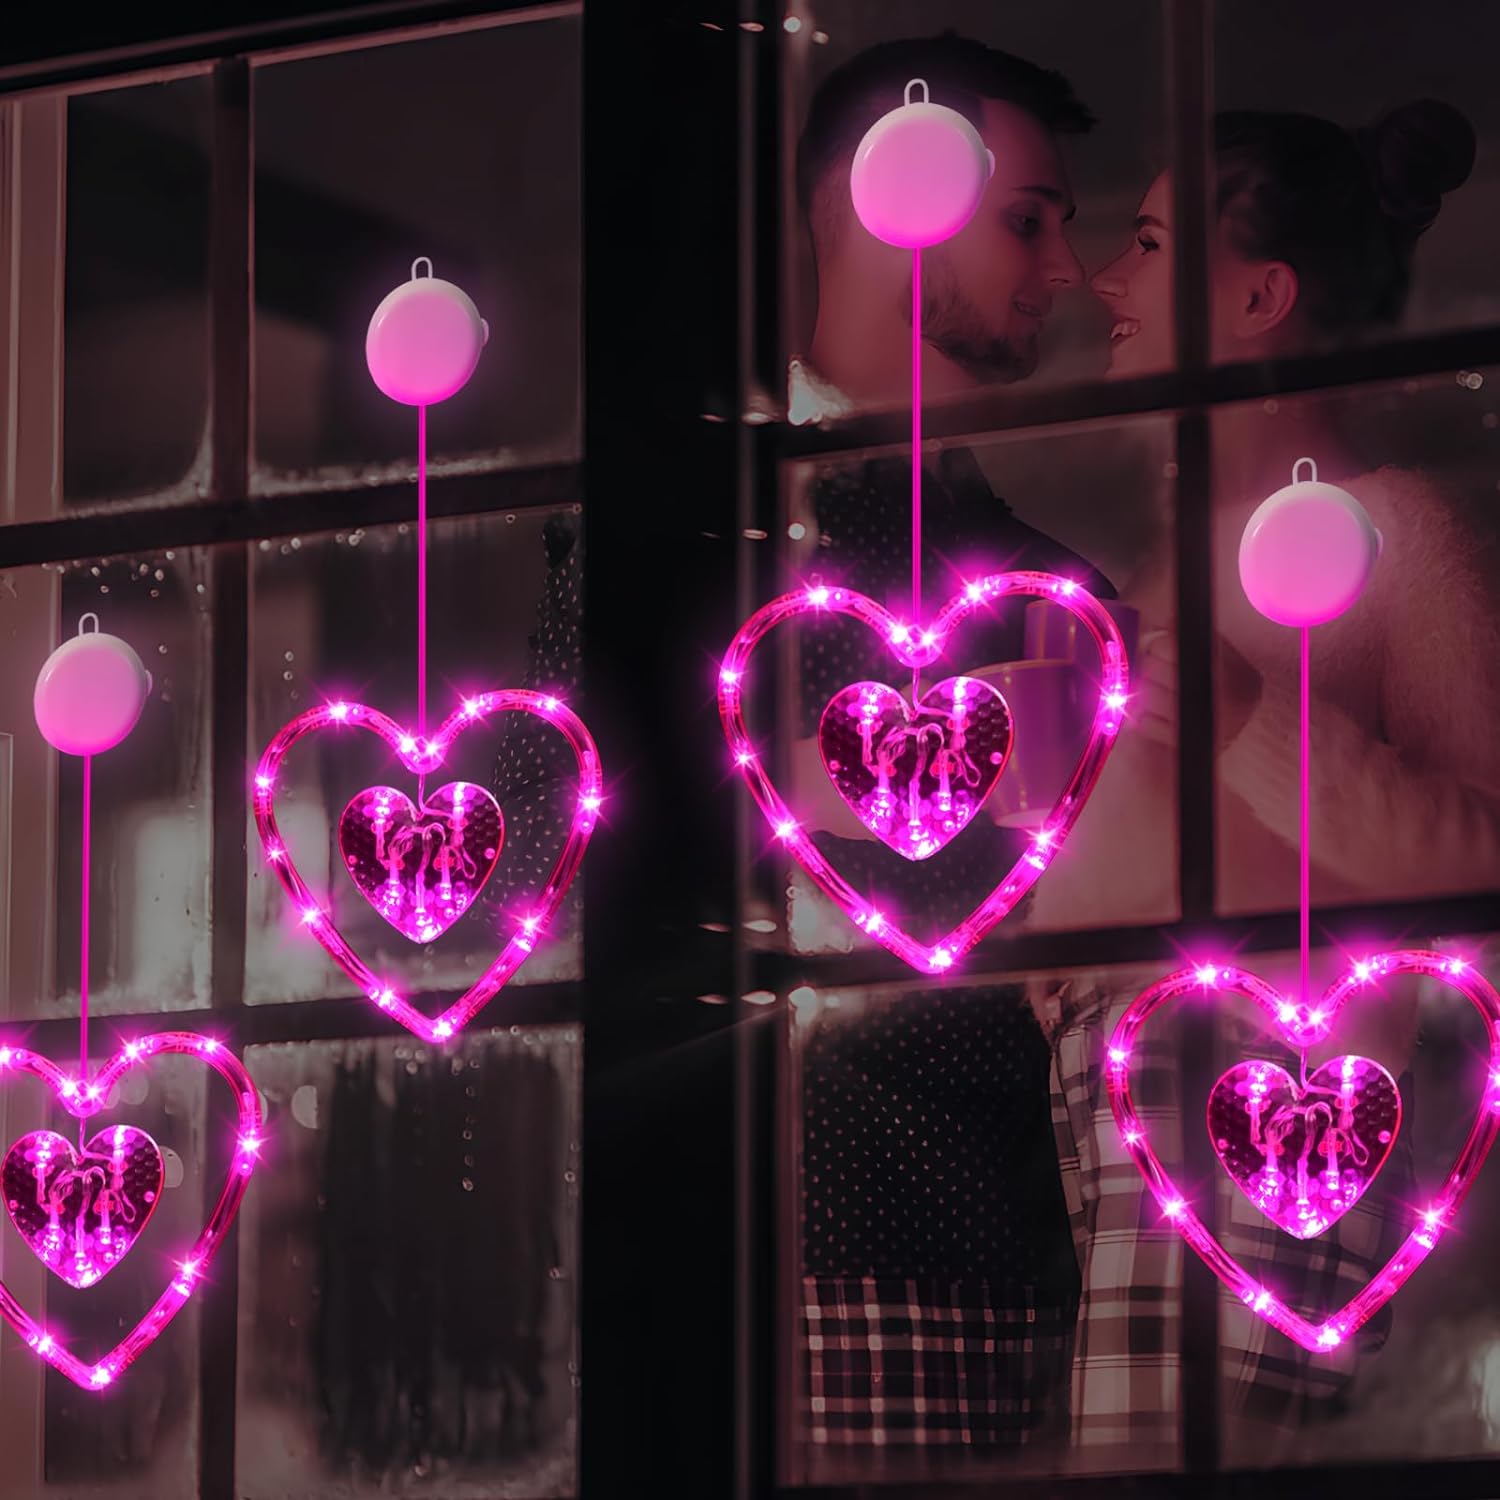 Valentines Day Window Lights Decorations (3 Pack) with Timer, Battery Powered Hanging Pink Lighted Heart